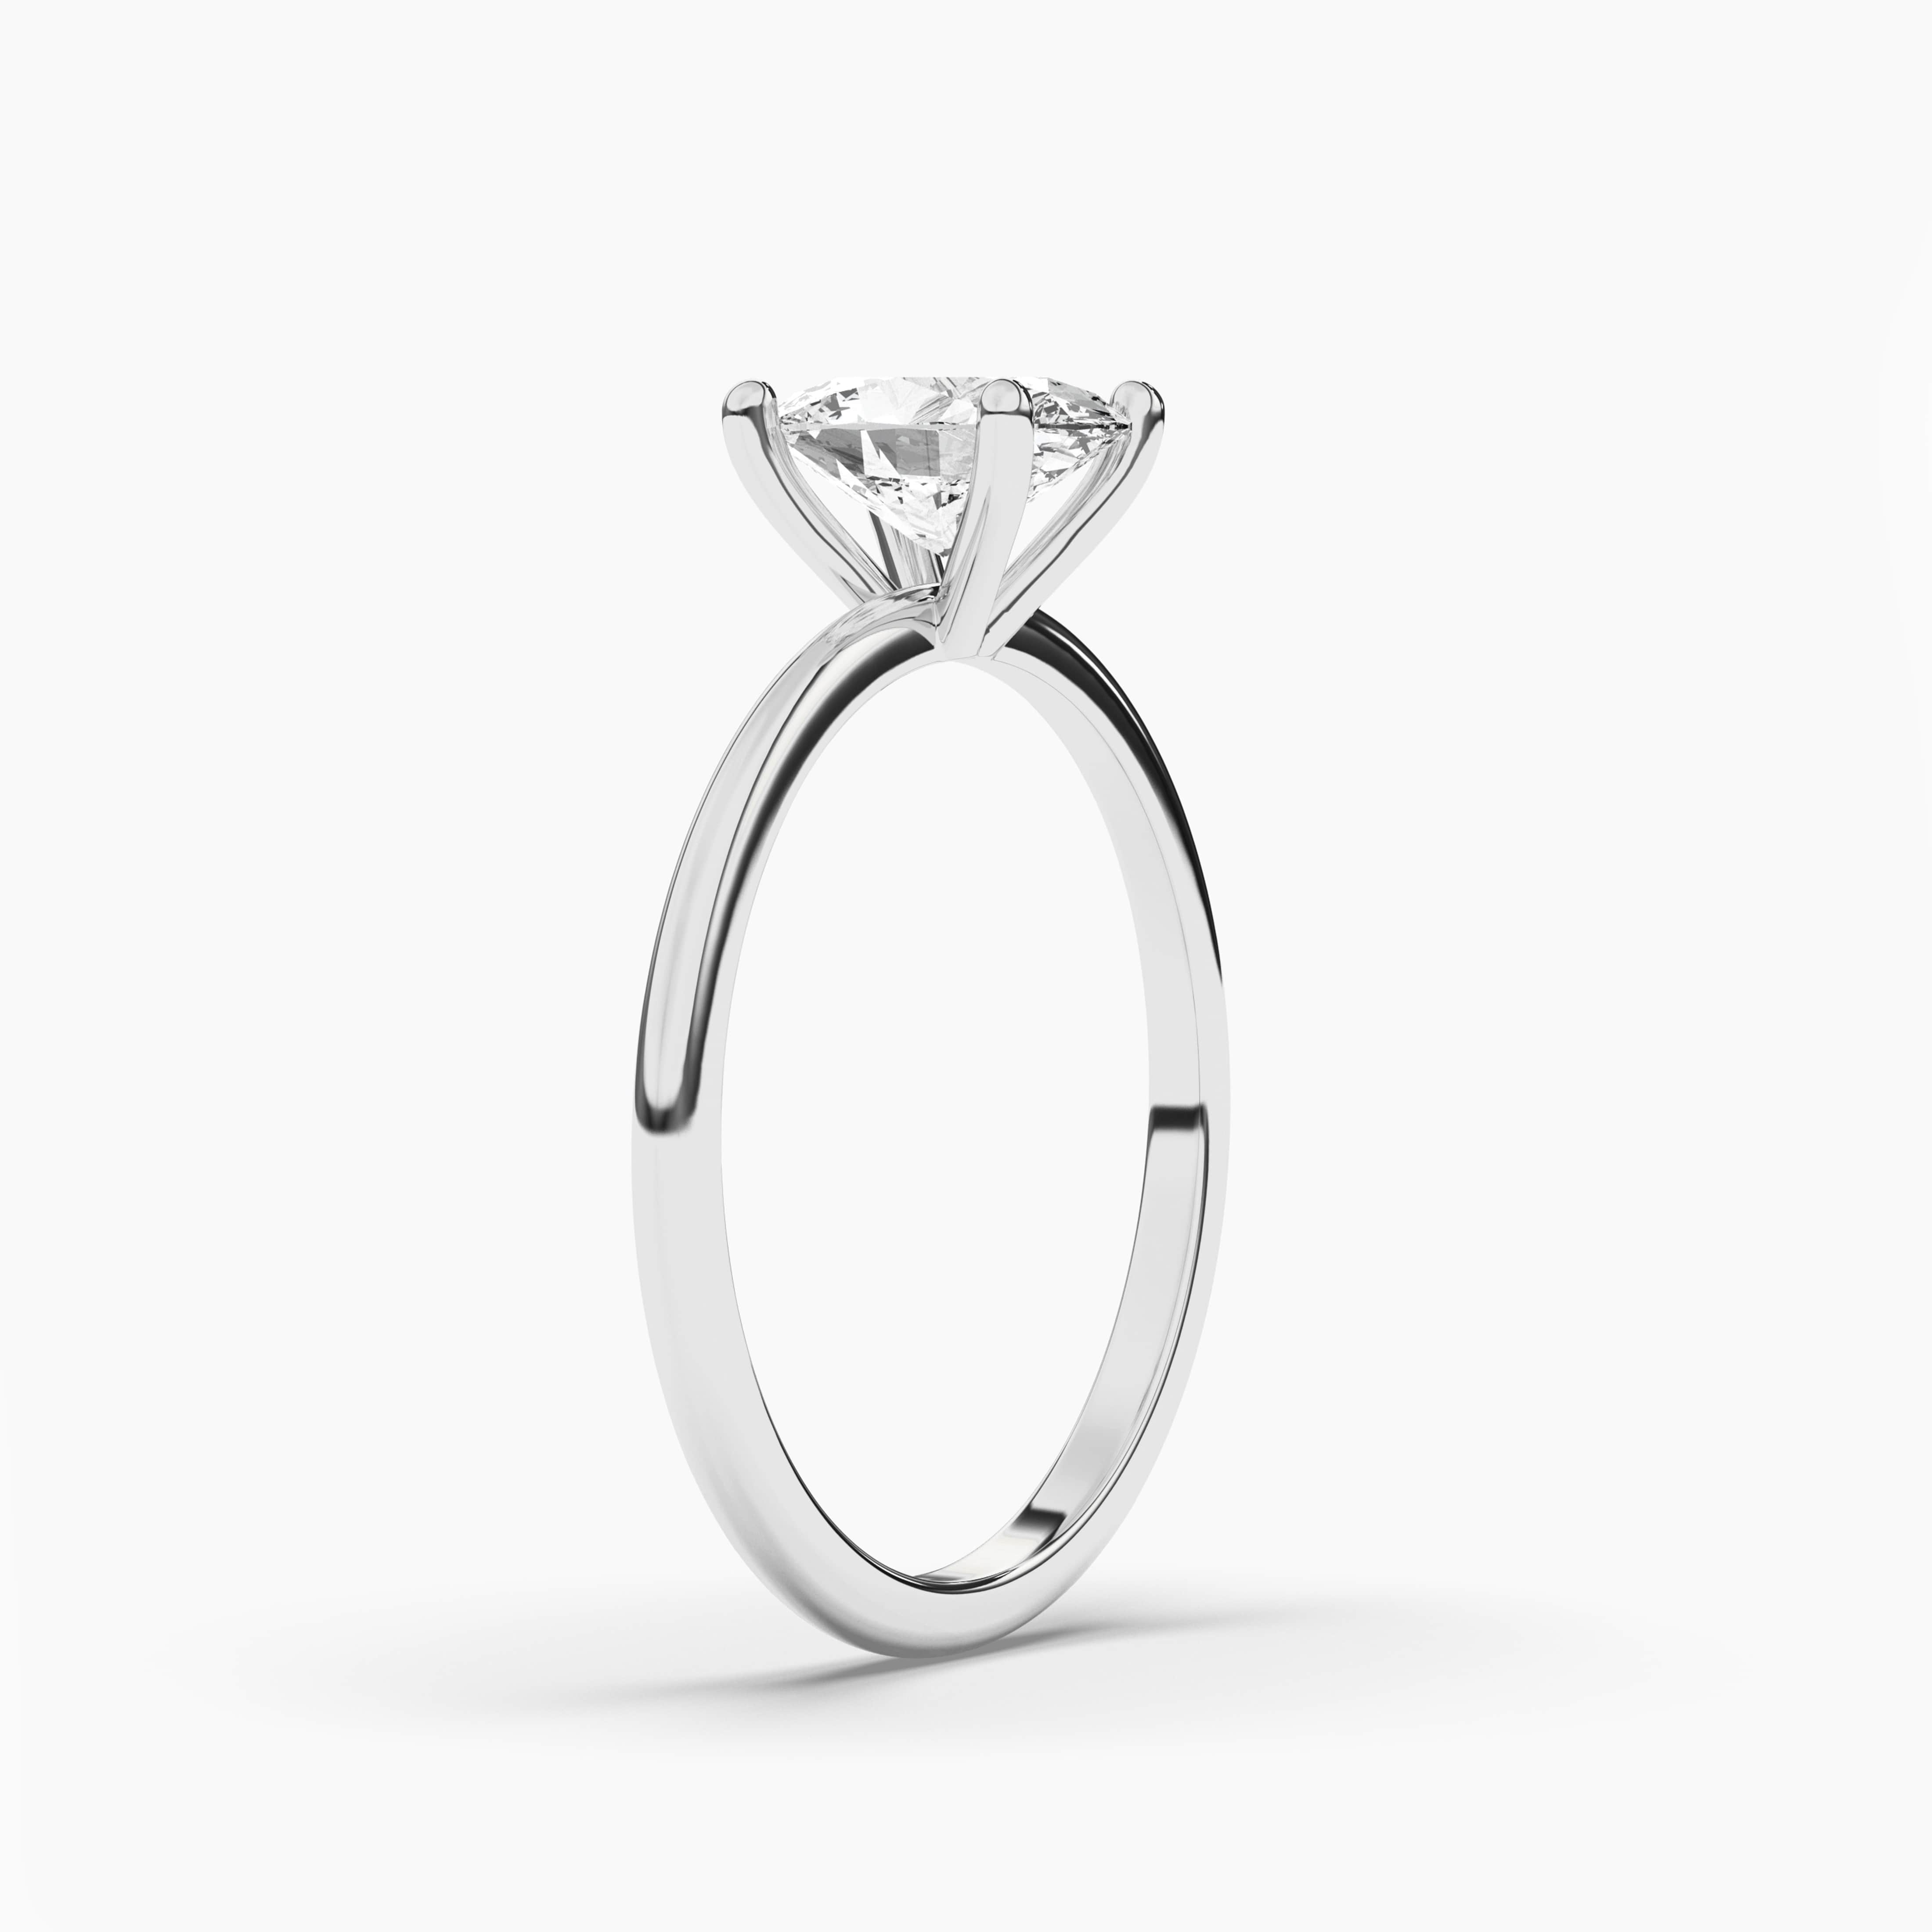 Certified Diamond Solitaire Ring Oval White Gold